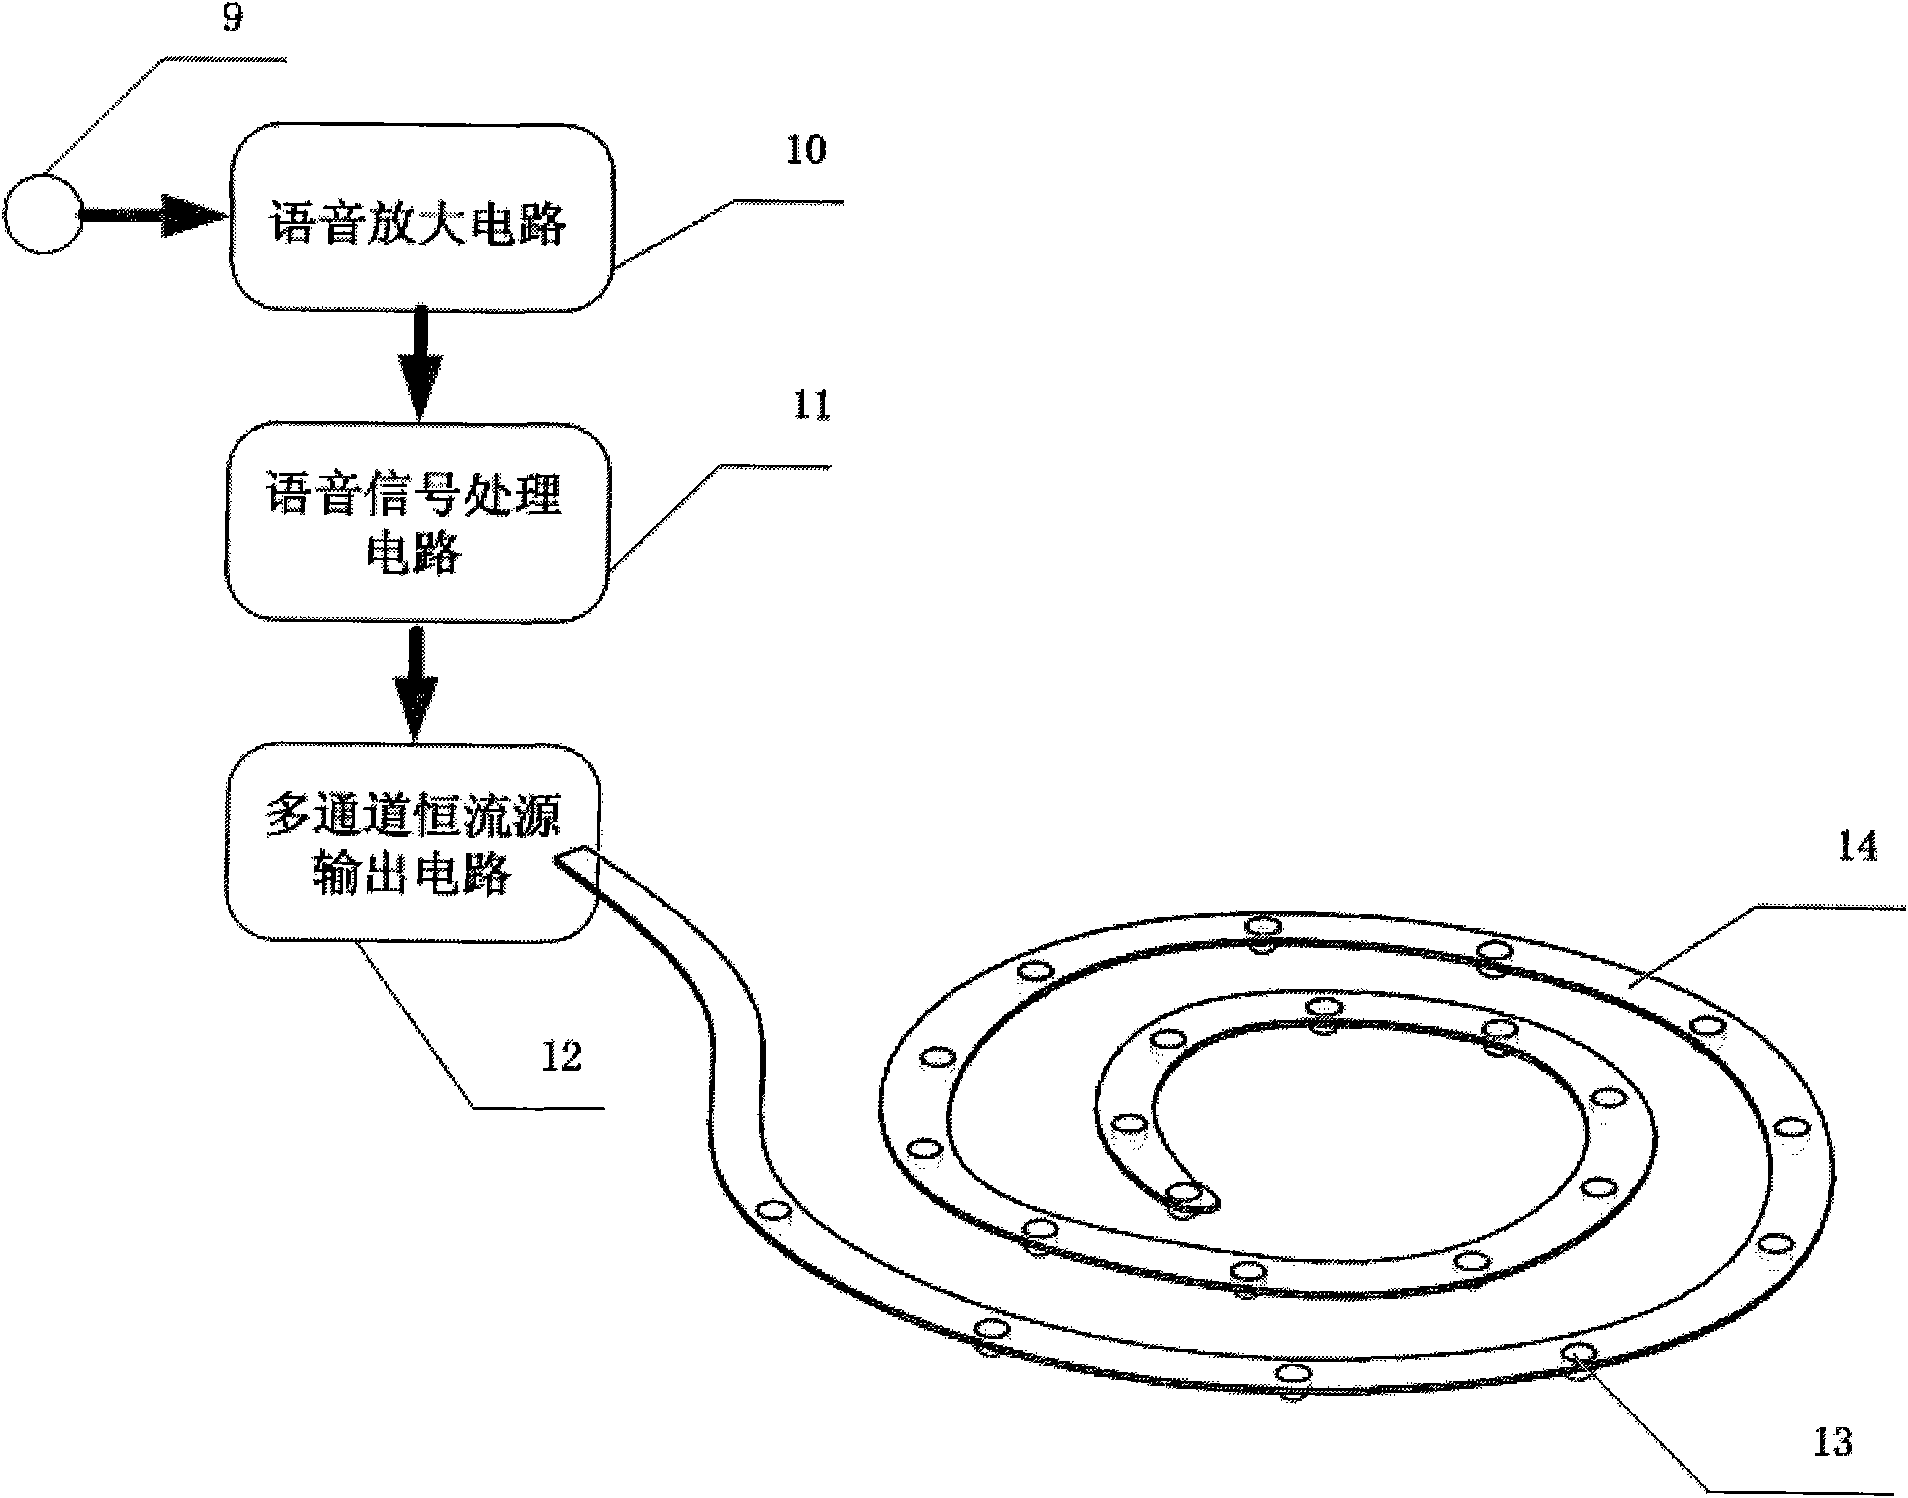 Multi-channel light stimulation-based cochlear implant device